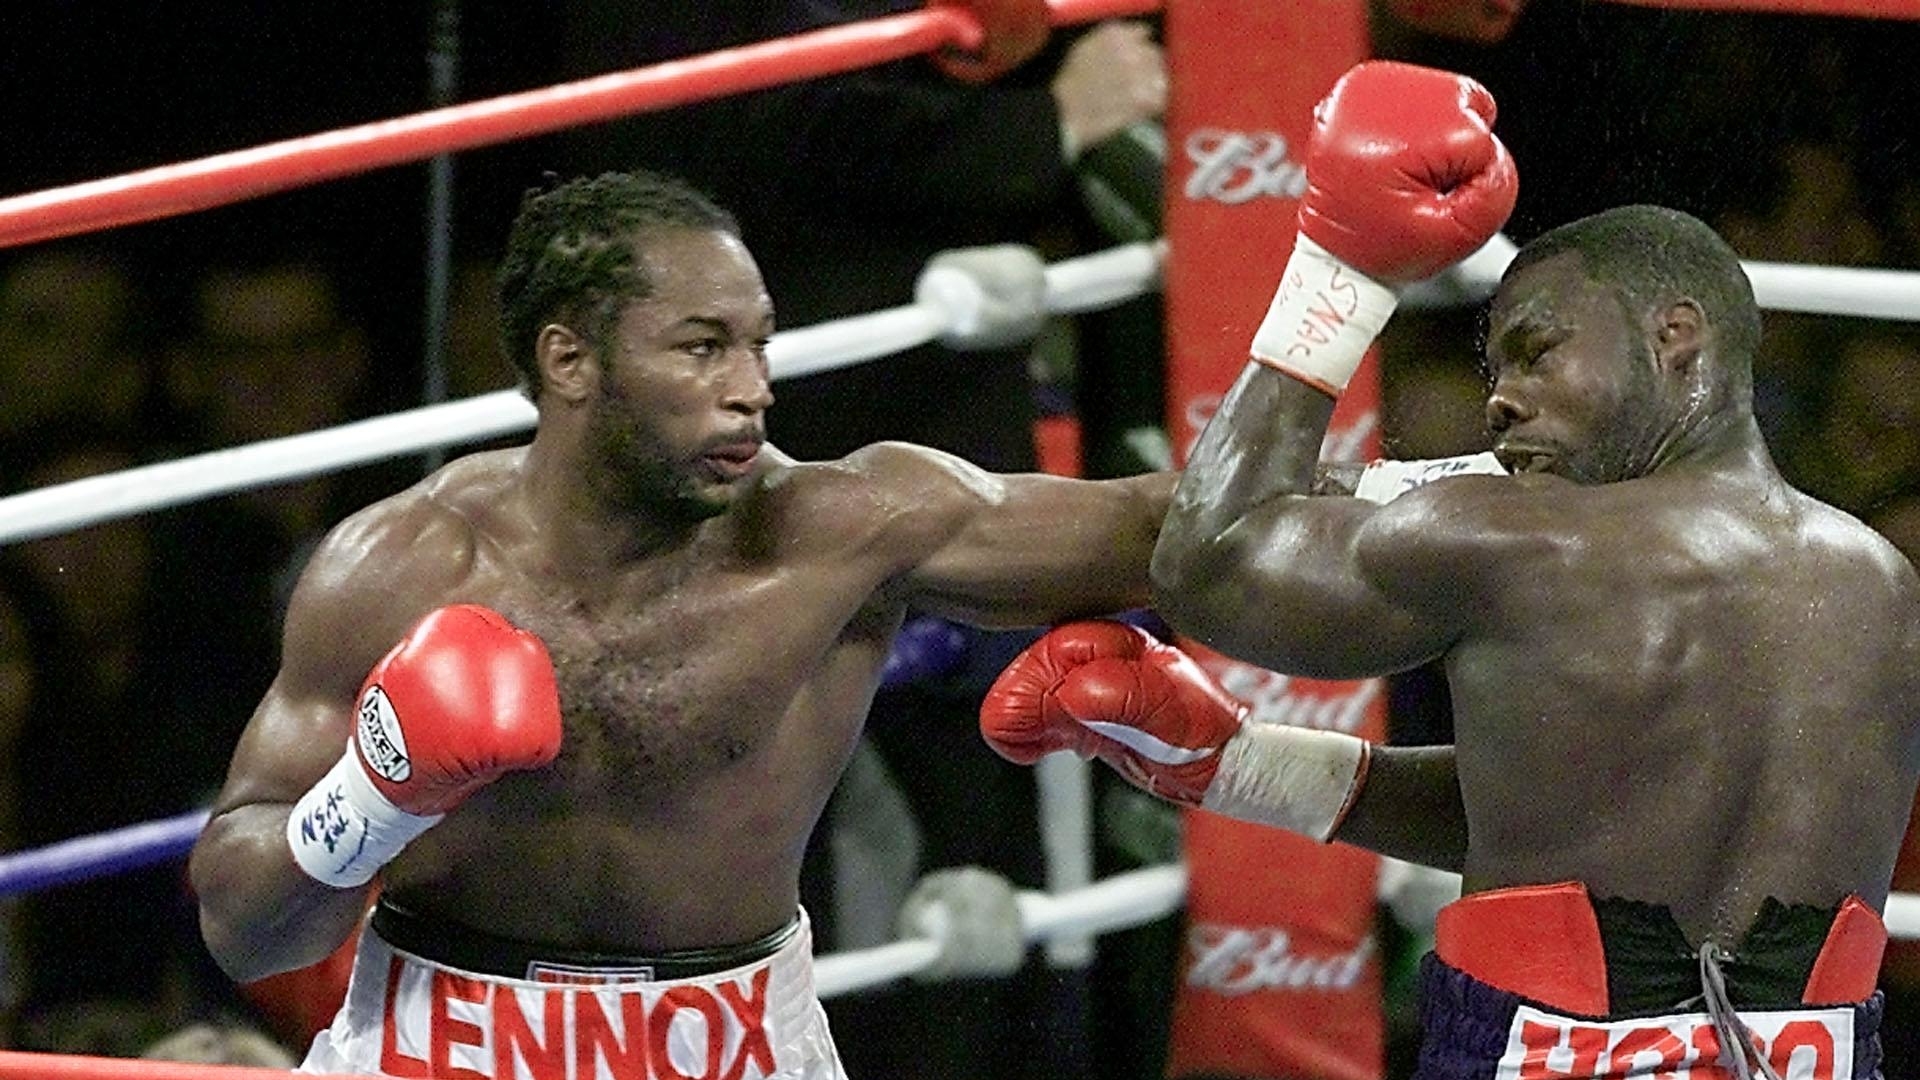 Lennox Lewis gives surprising answer when asked who's the hardest puncher he ever faced